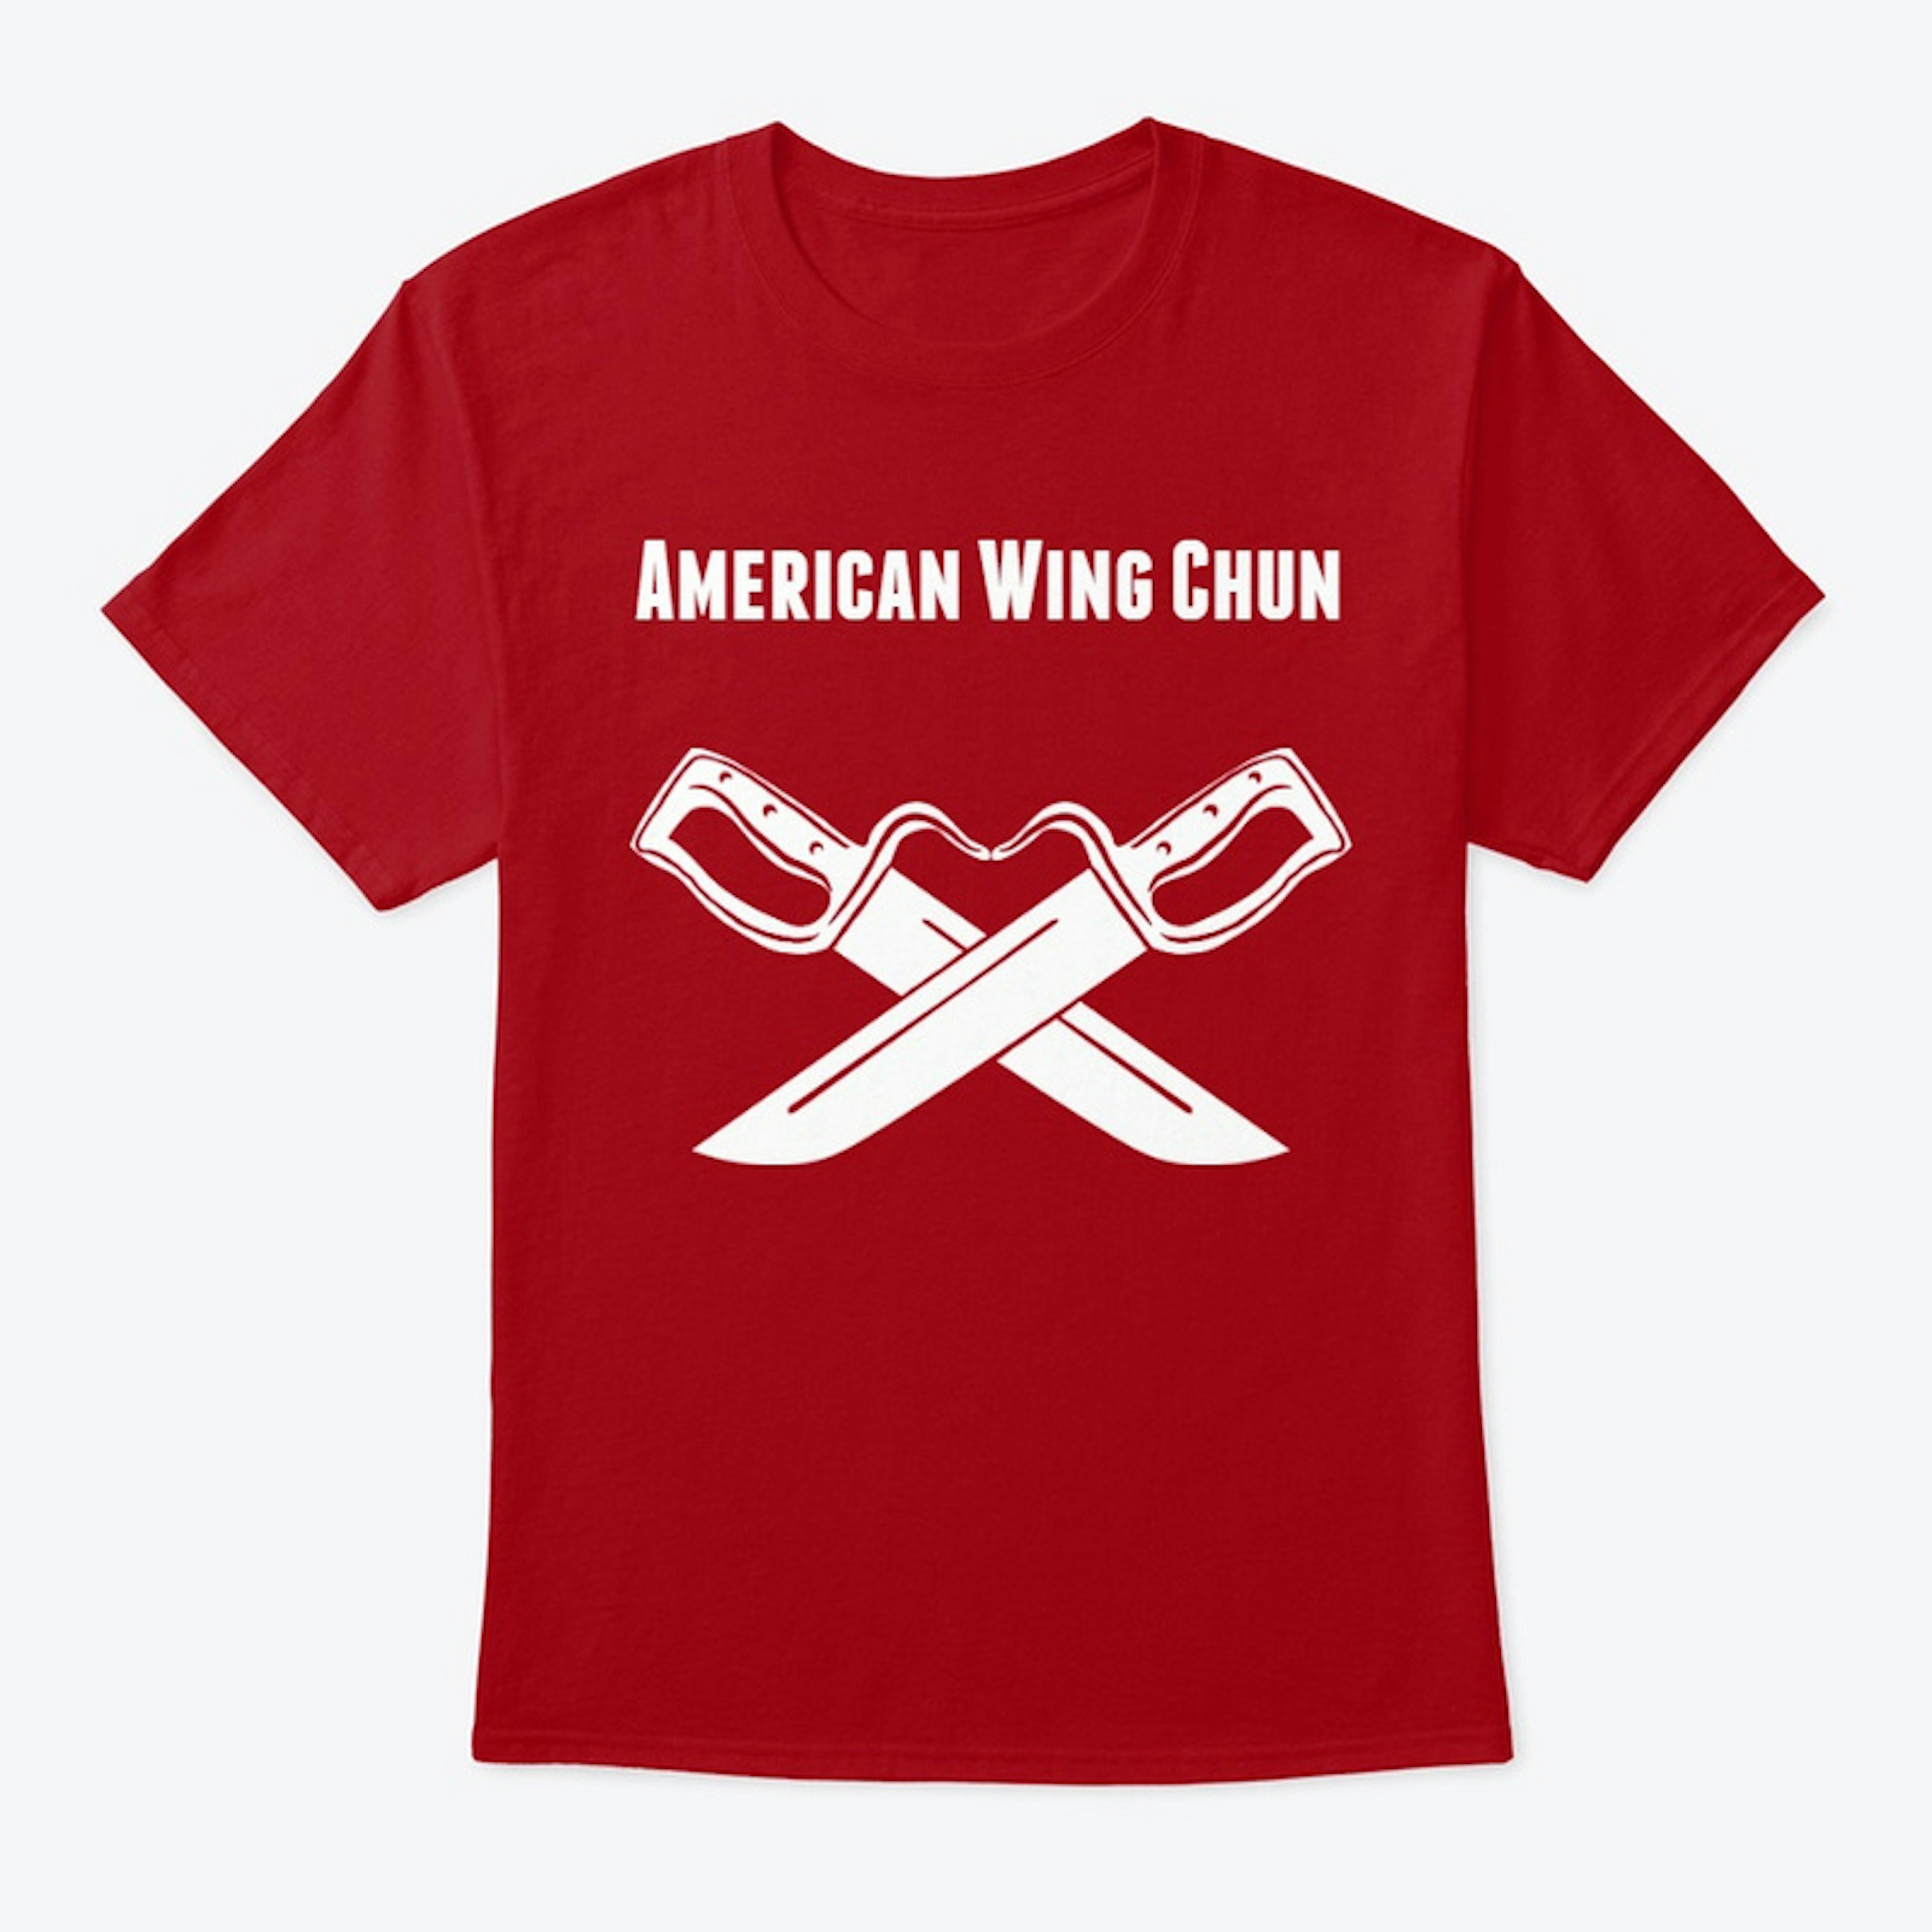 AWC Bart Cham Dao white on red